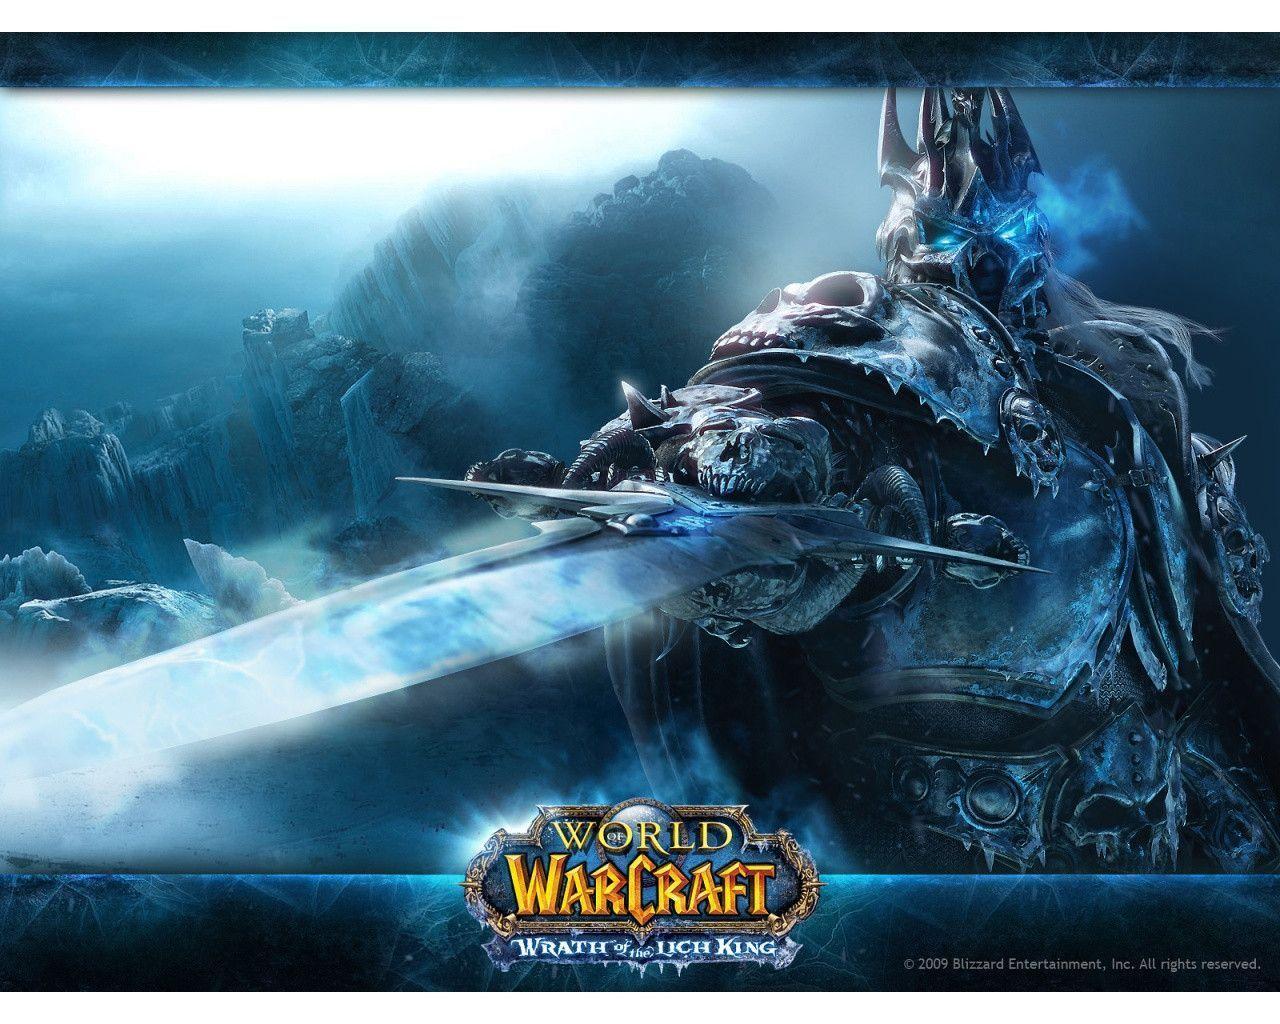 World of Warcraft Wrath of the Lich King wallpaper